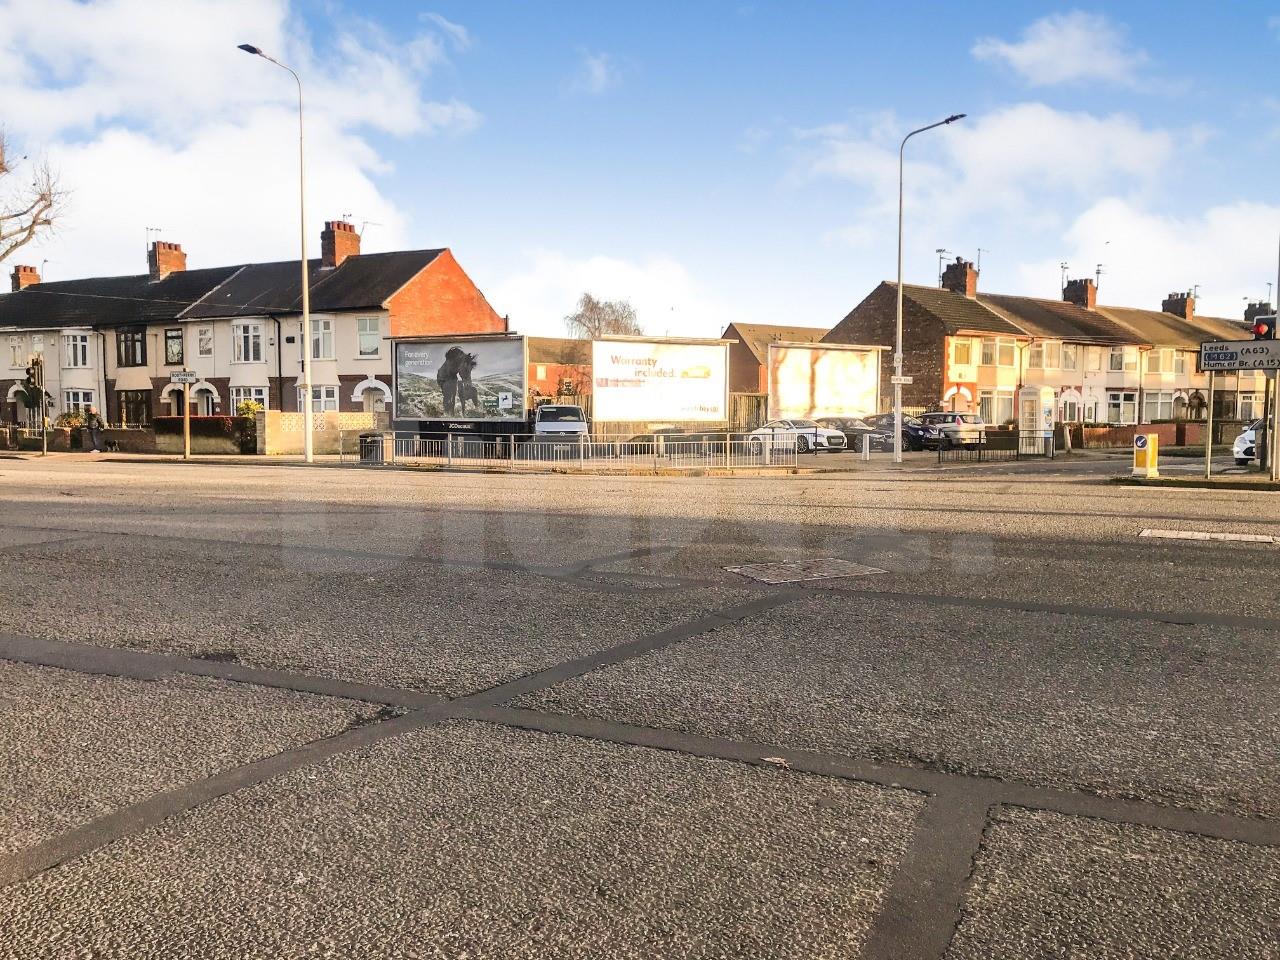 Land at Boothferry Road / North Road, Hull, HU4 6AX 1/7